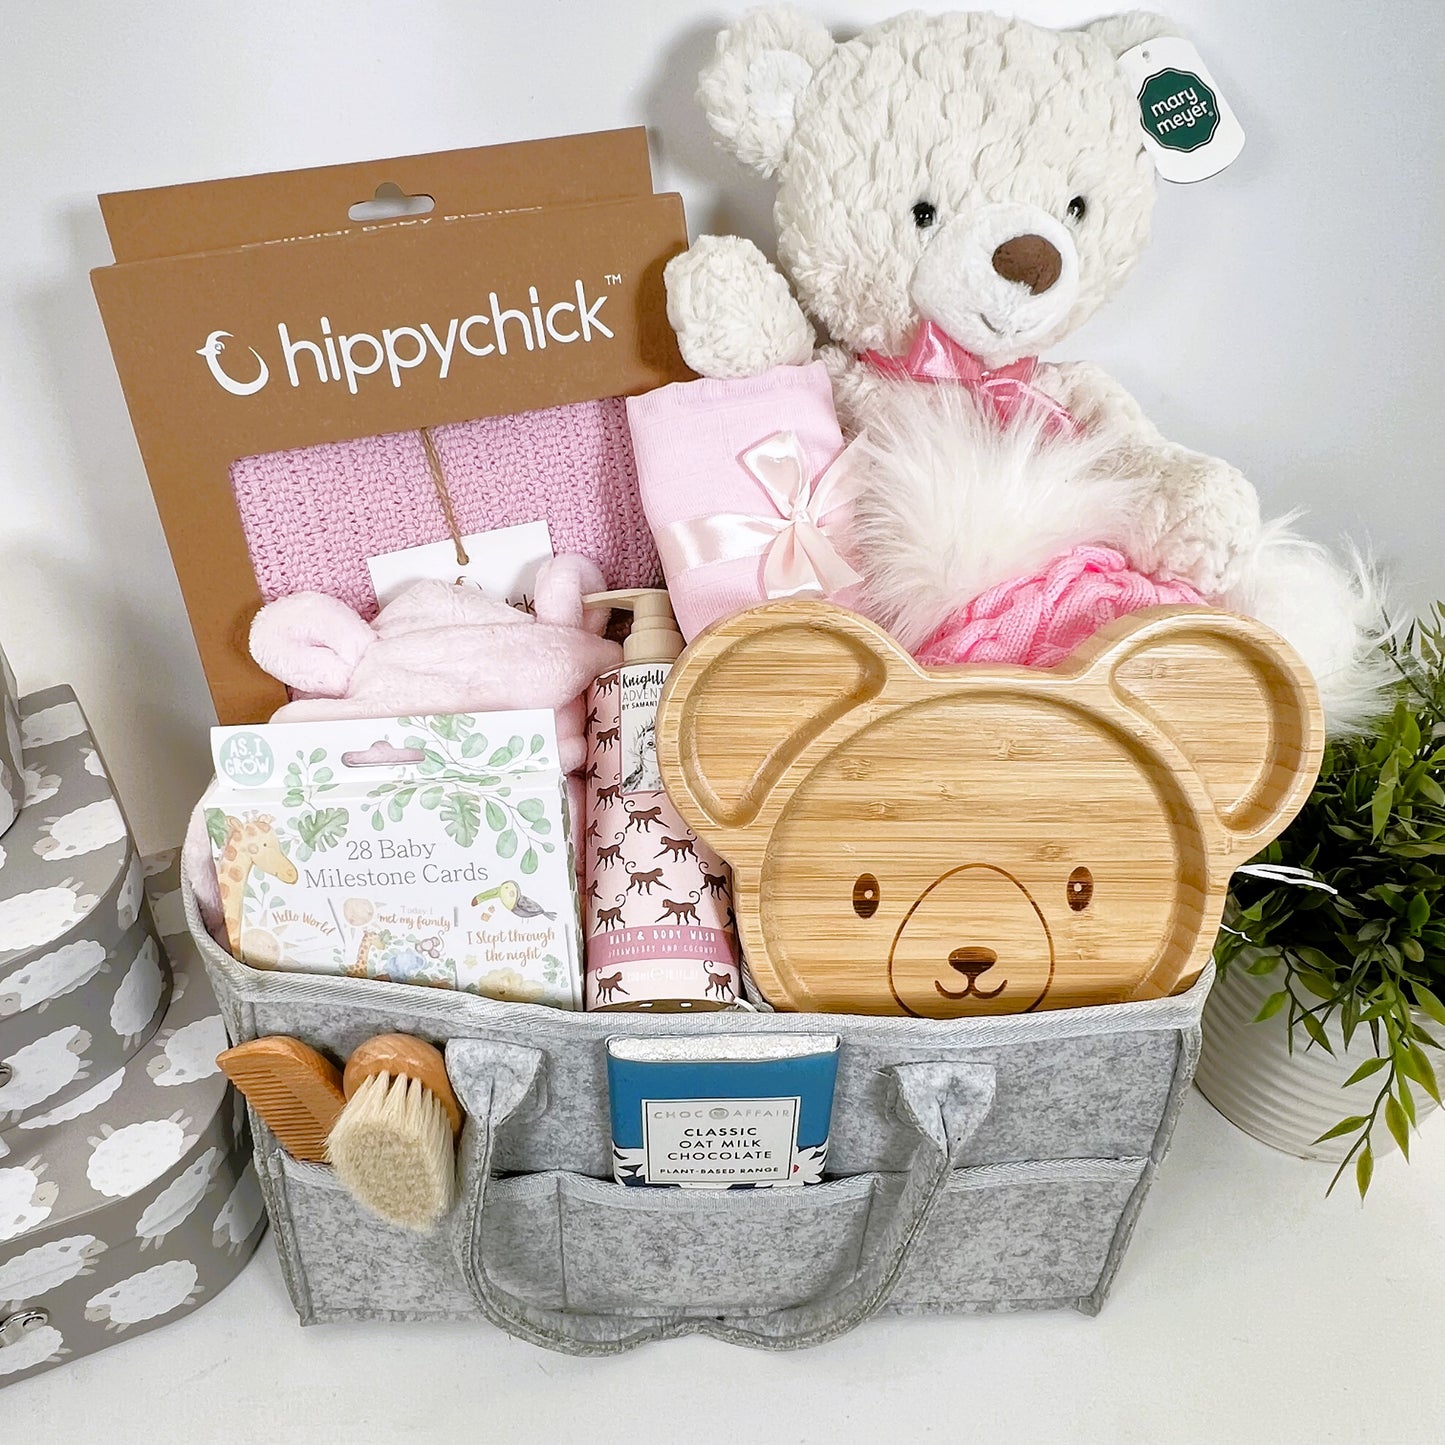 A grey nappy caddy  baby hamper gift containing a Mary Meyer large Putty cream baer, a pink baby dressing gown , apink Hippychick cellular baby blankets, a bear bamboo baby plate, a wooden baby hairbrush and comb set a pink pom pom baby hat and various baby toiletries.